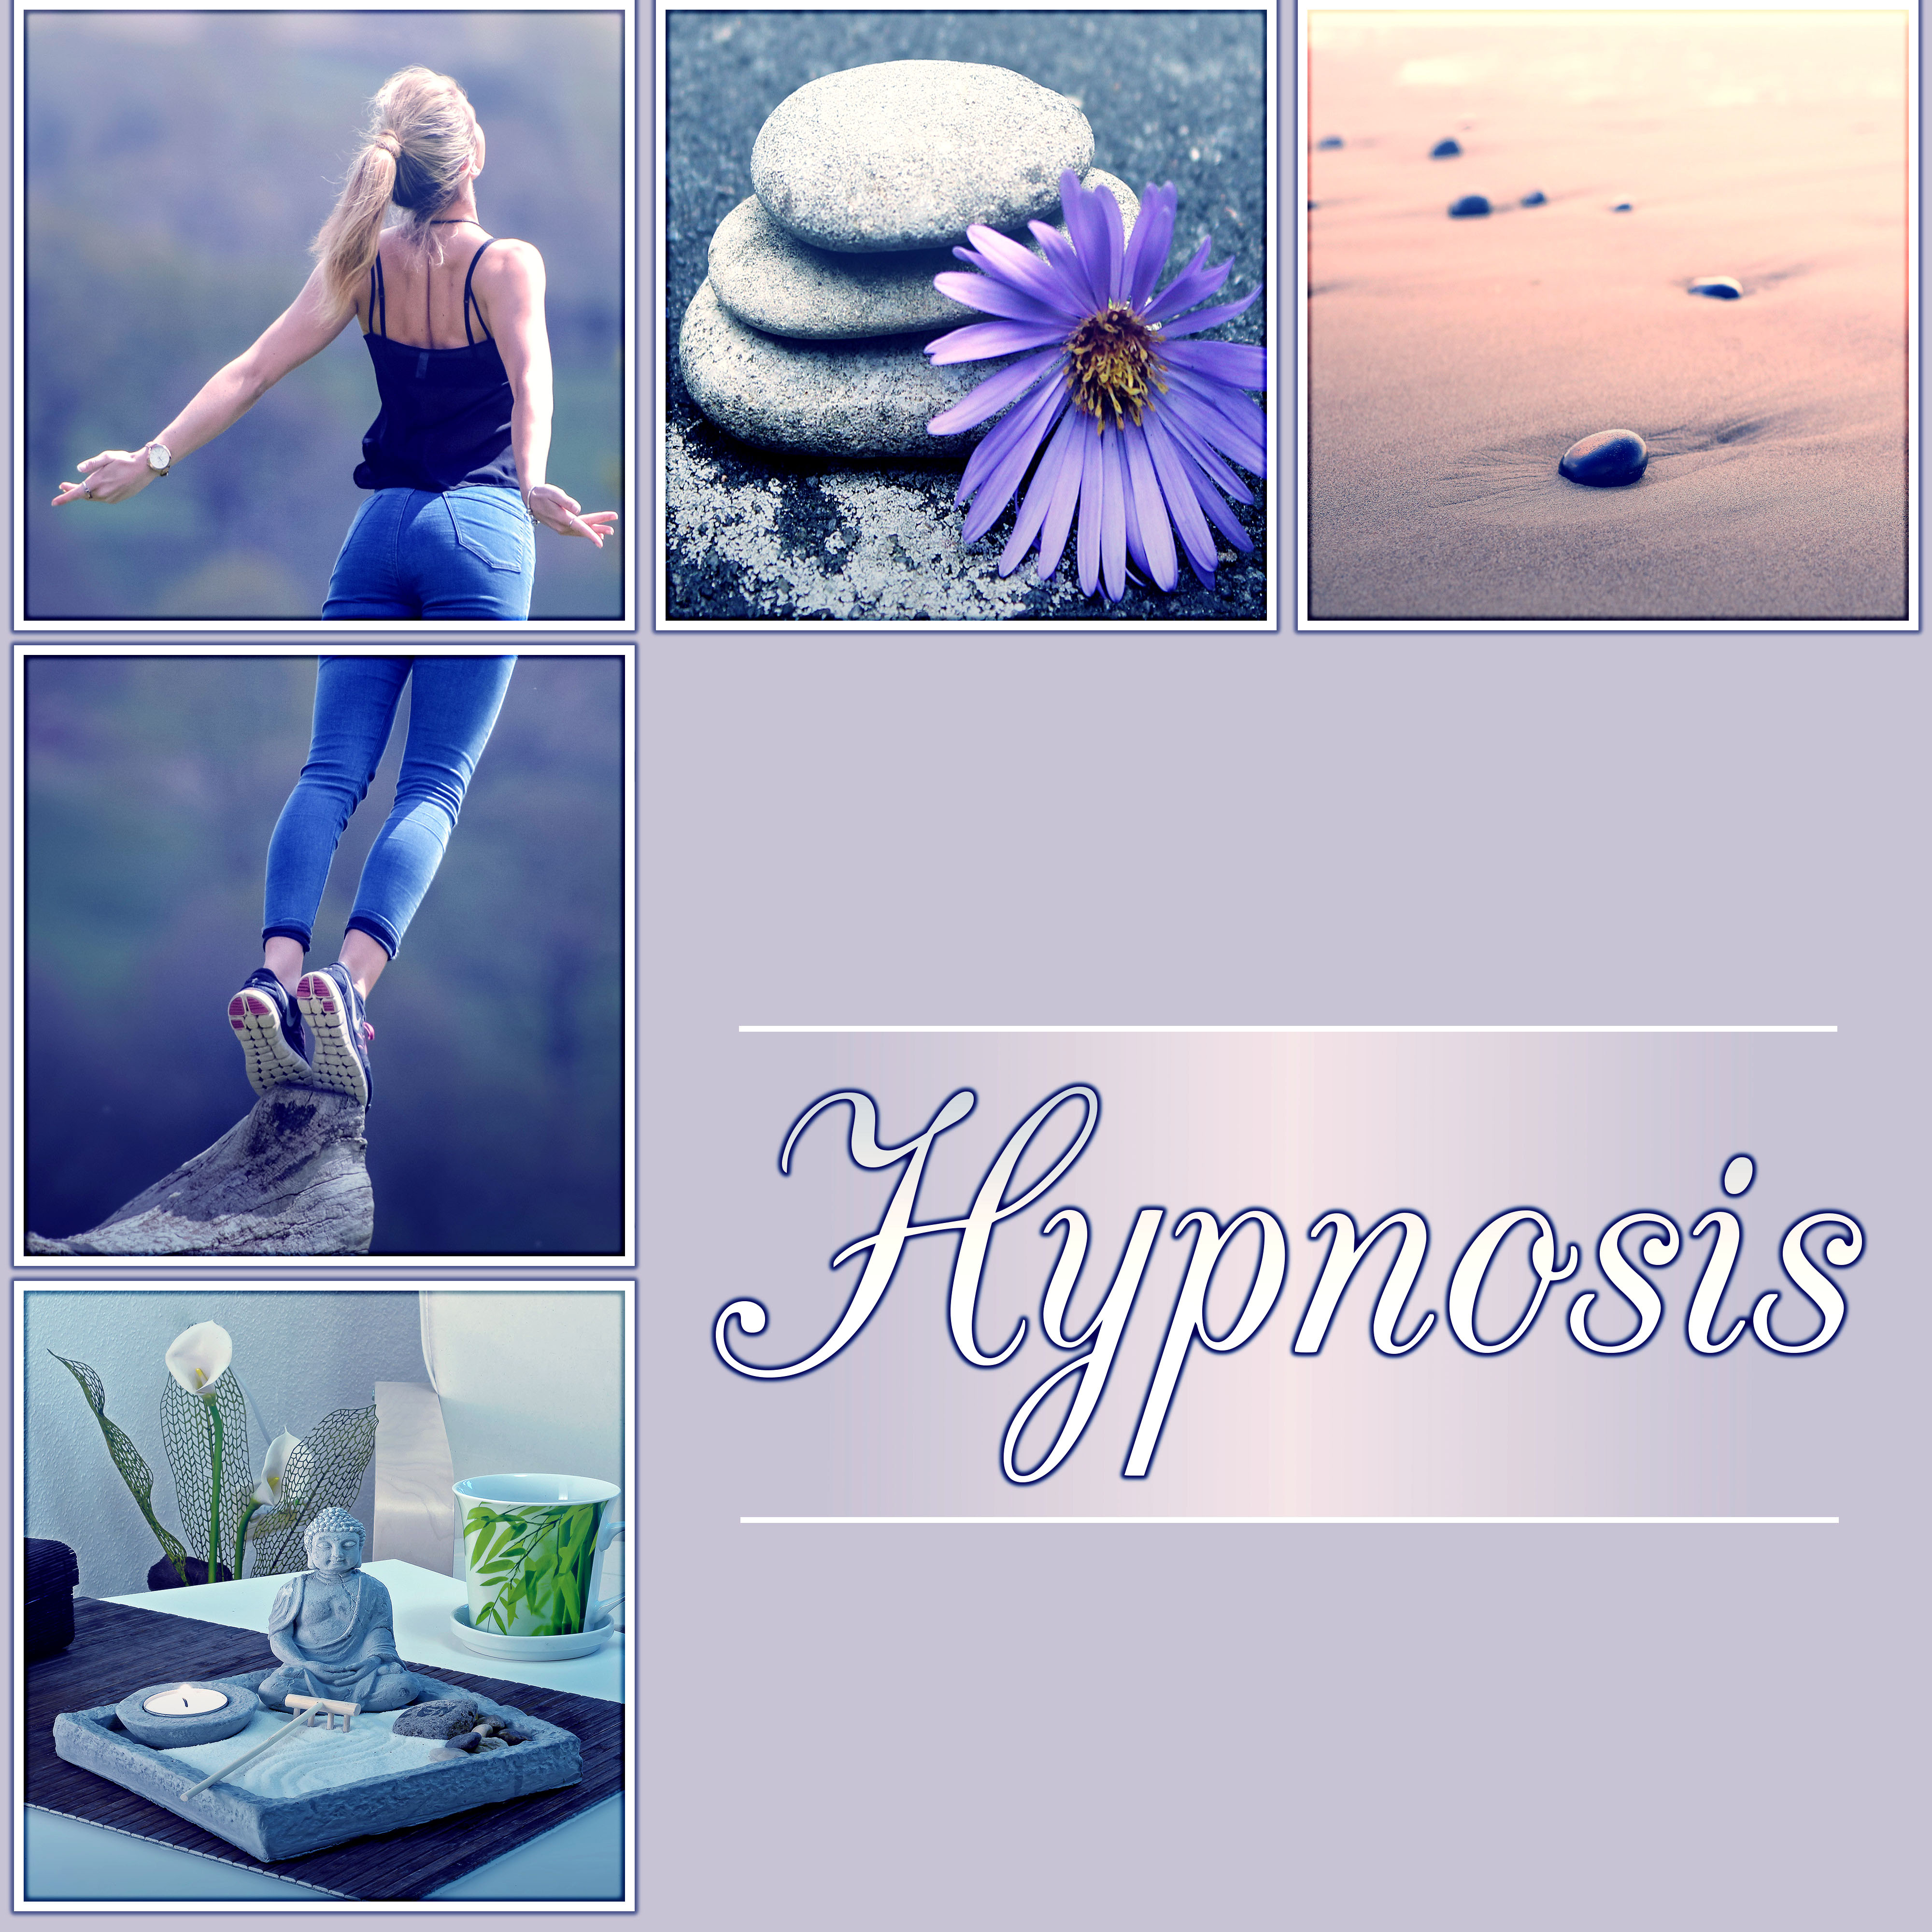 Hypnosis - Songs to Inspire Balance for Massage, Yoga, Relaxation, Meditation, Reiki, Well Being, Perfect Harmony, Relaxation Music, Concentration Music & Essential Side of Life